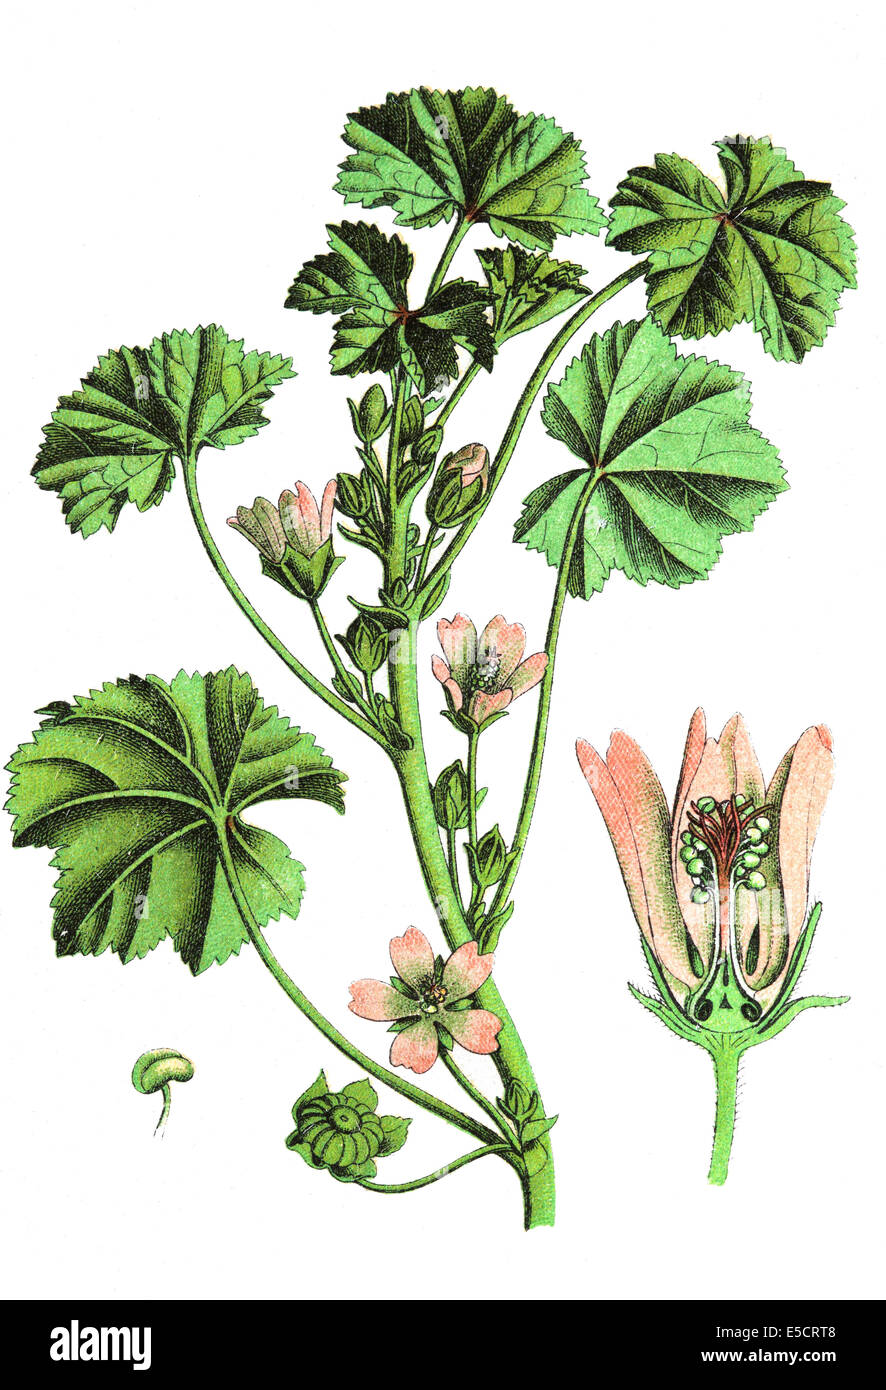 Malva neglecta is also known as Common mallow in the United States and also buttonweed, cheeseplant, cheeseweed, dwarf mallow an Stock Photo